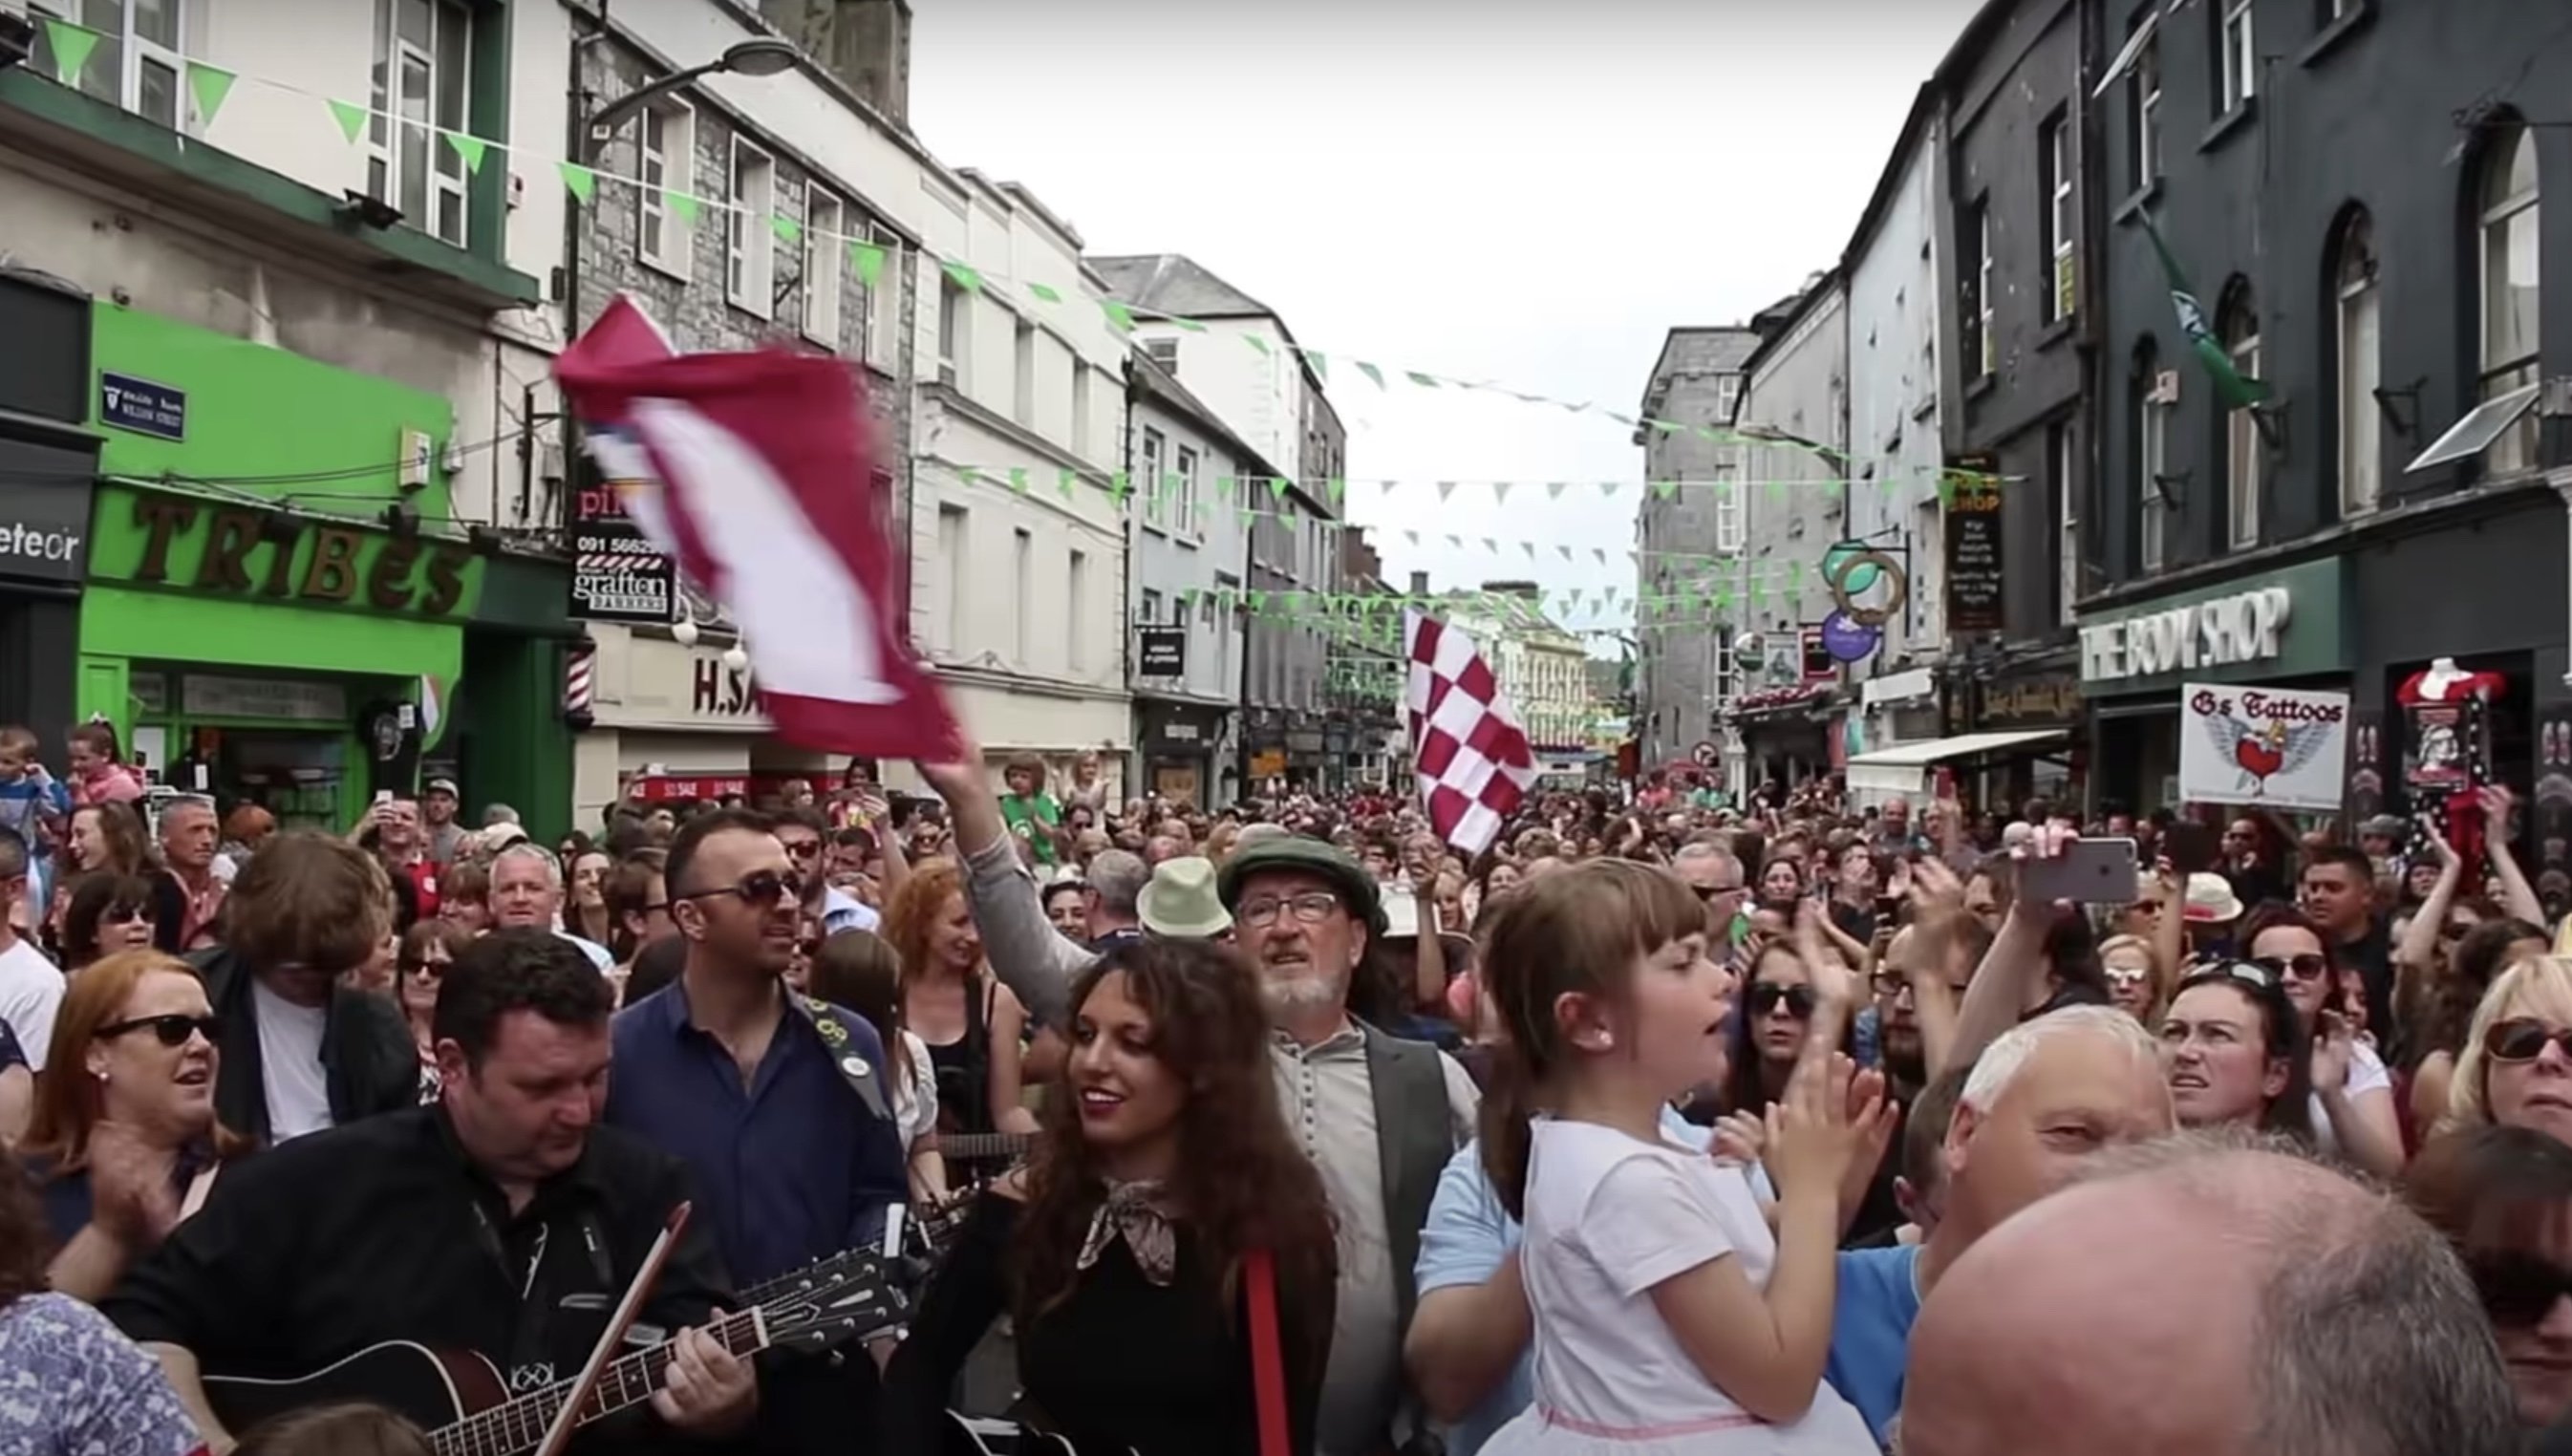 Knowing The Galway Girl lyrics allows you to sing along with one of our favorite Irish songs!